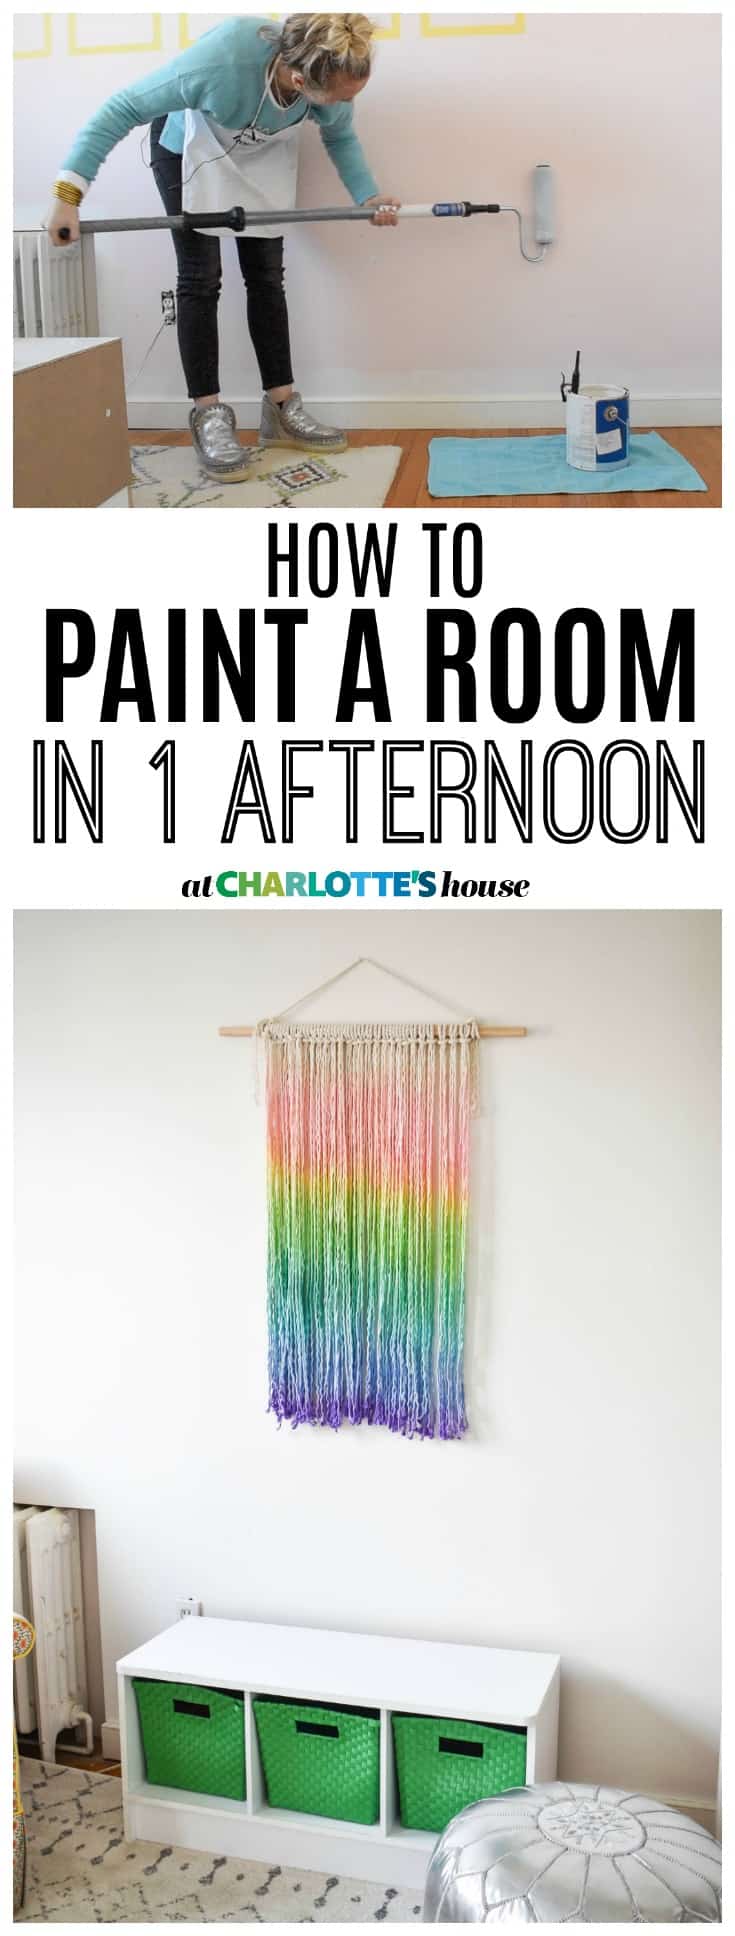 how-to-paint-a-room-in-1-afternoon